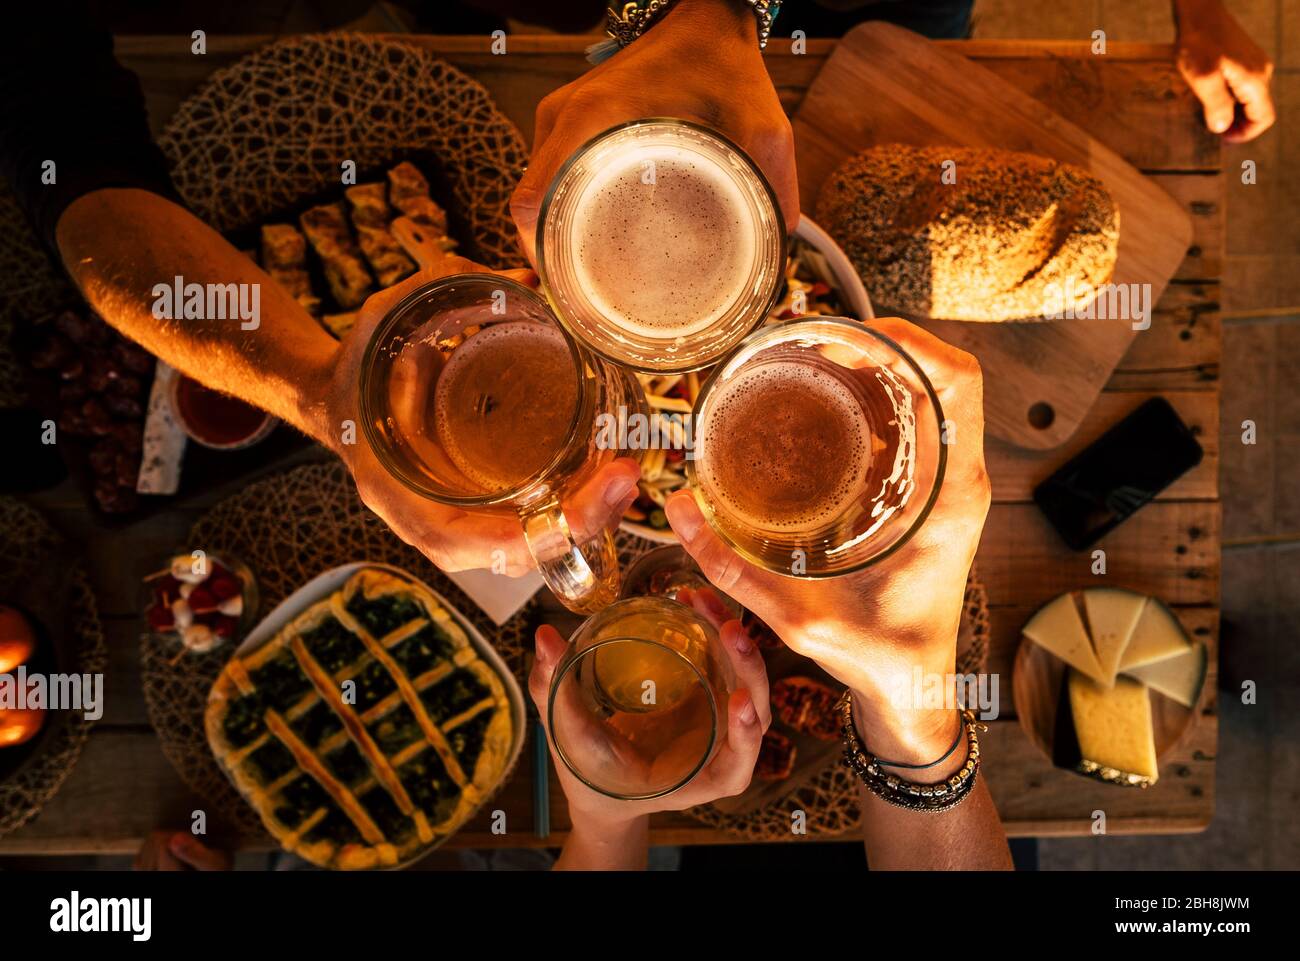 Top view of hands with beers cheering and having fun together - friends at dinner celebrating - wood table with a lot of food viewed from above - friendship and event party concept Stock Photo